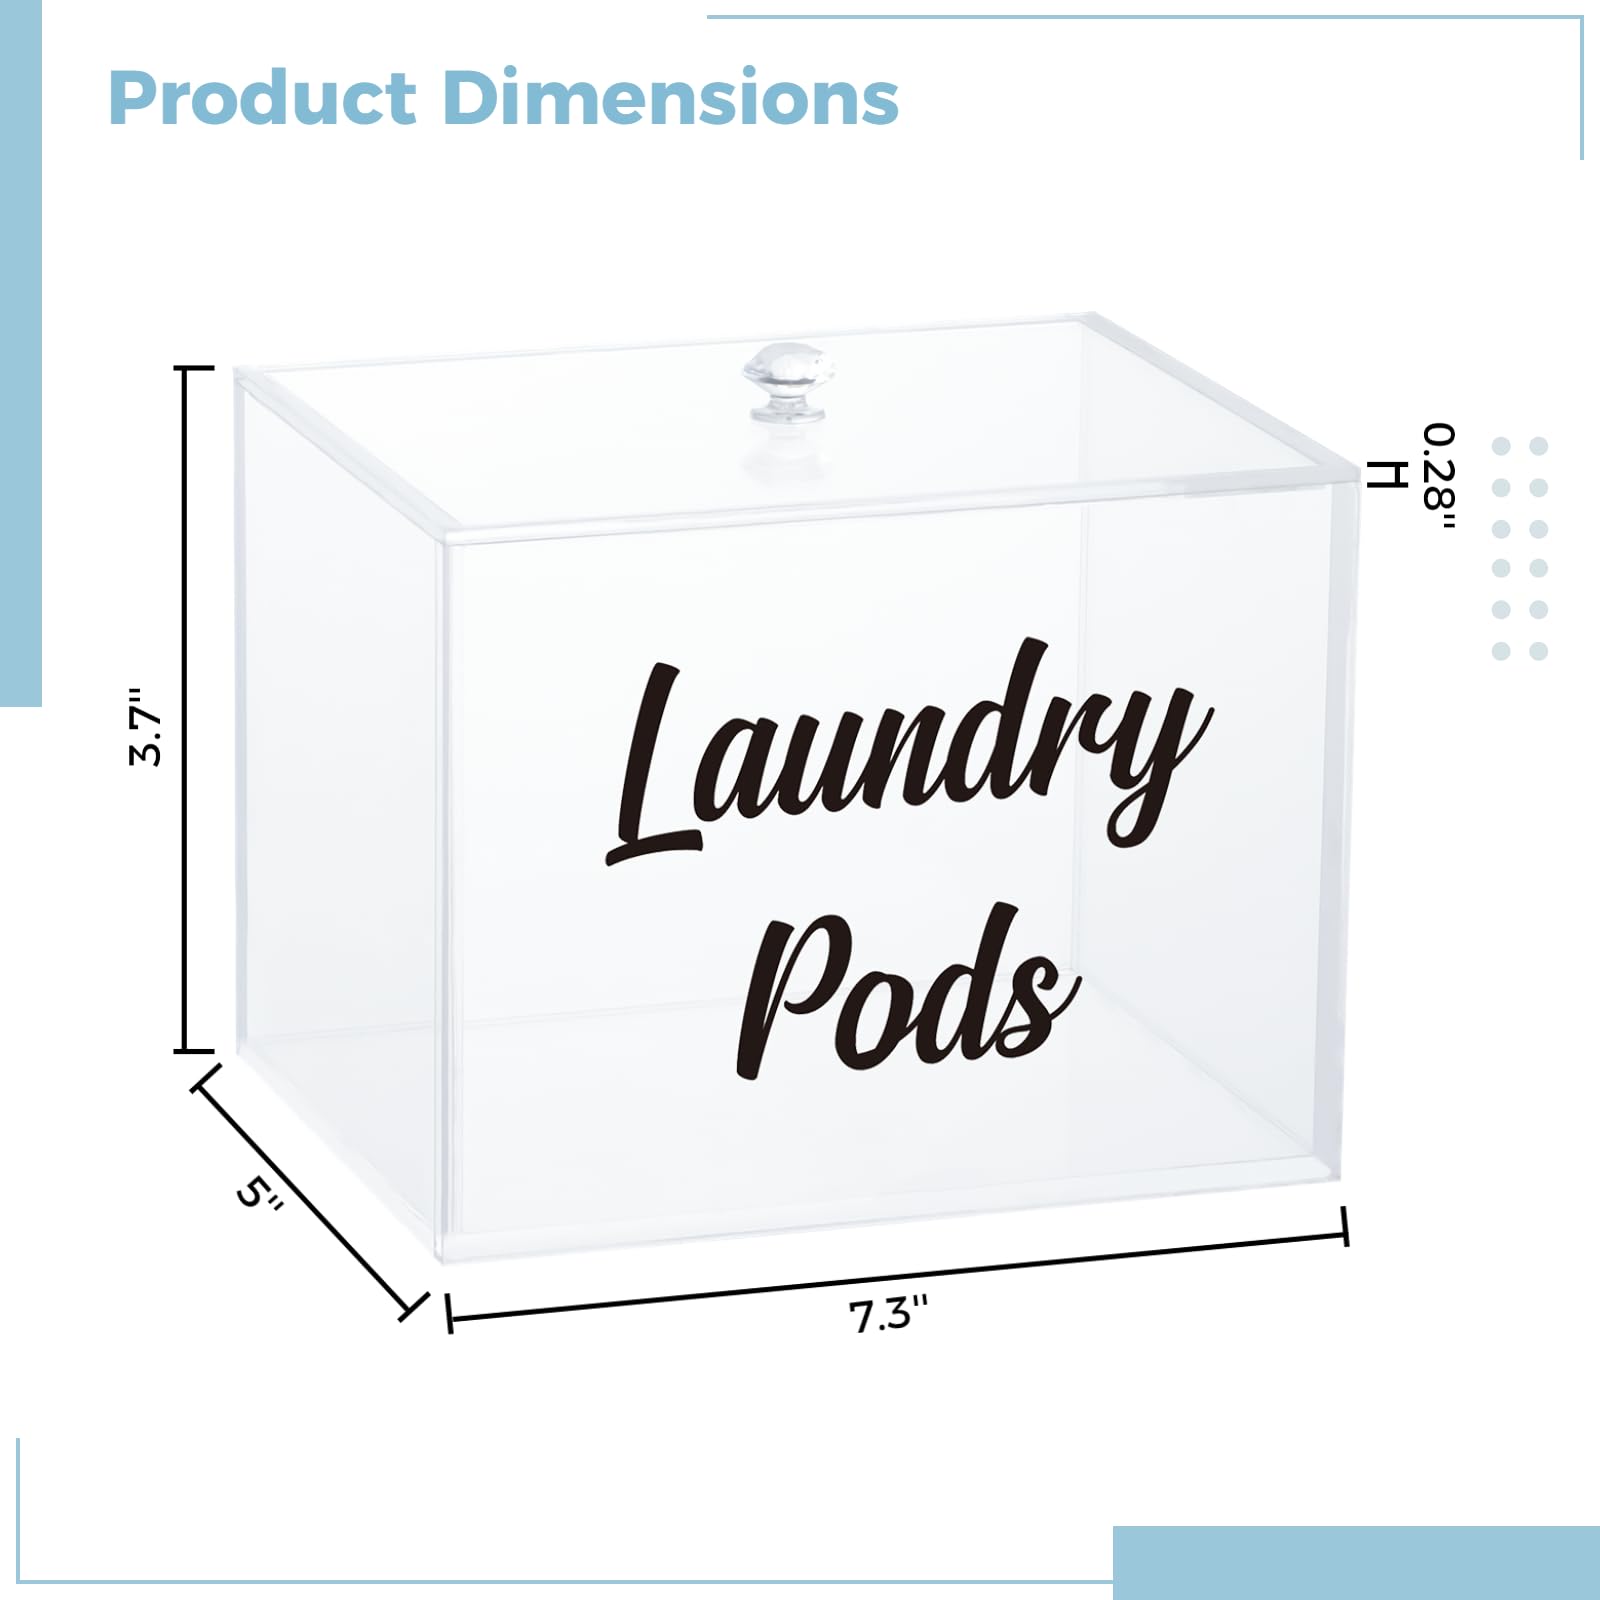 CDOKY 2.2L Laundry Pods Container with Lid, Acrylic Laundry Pods Storage, Laundry Detergent Capsules Holder, Small Container Box for Laundry Room Decor